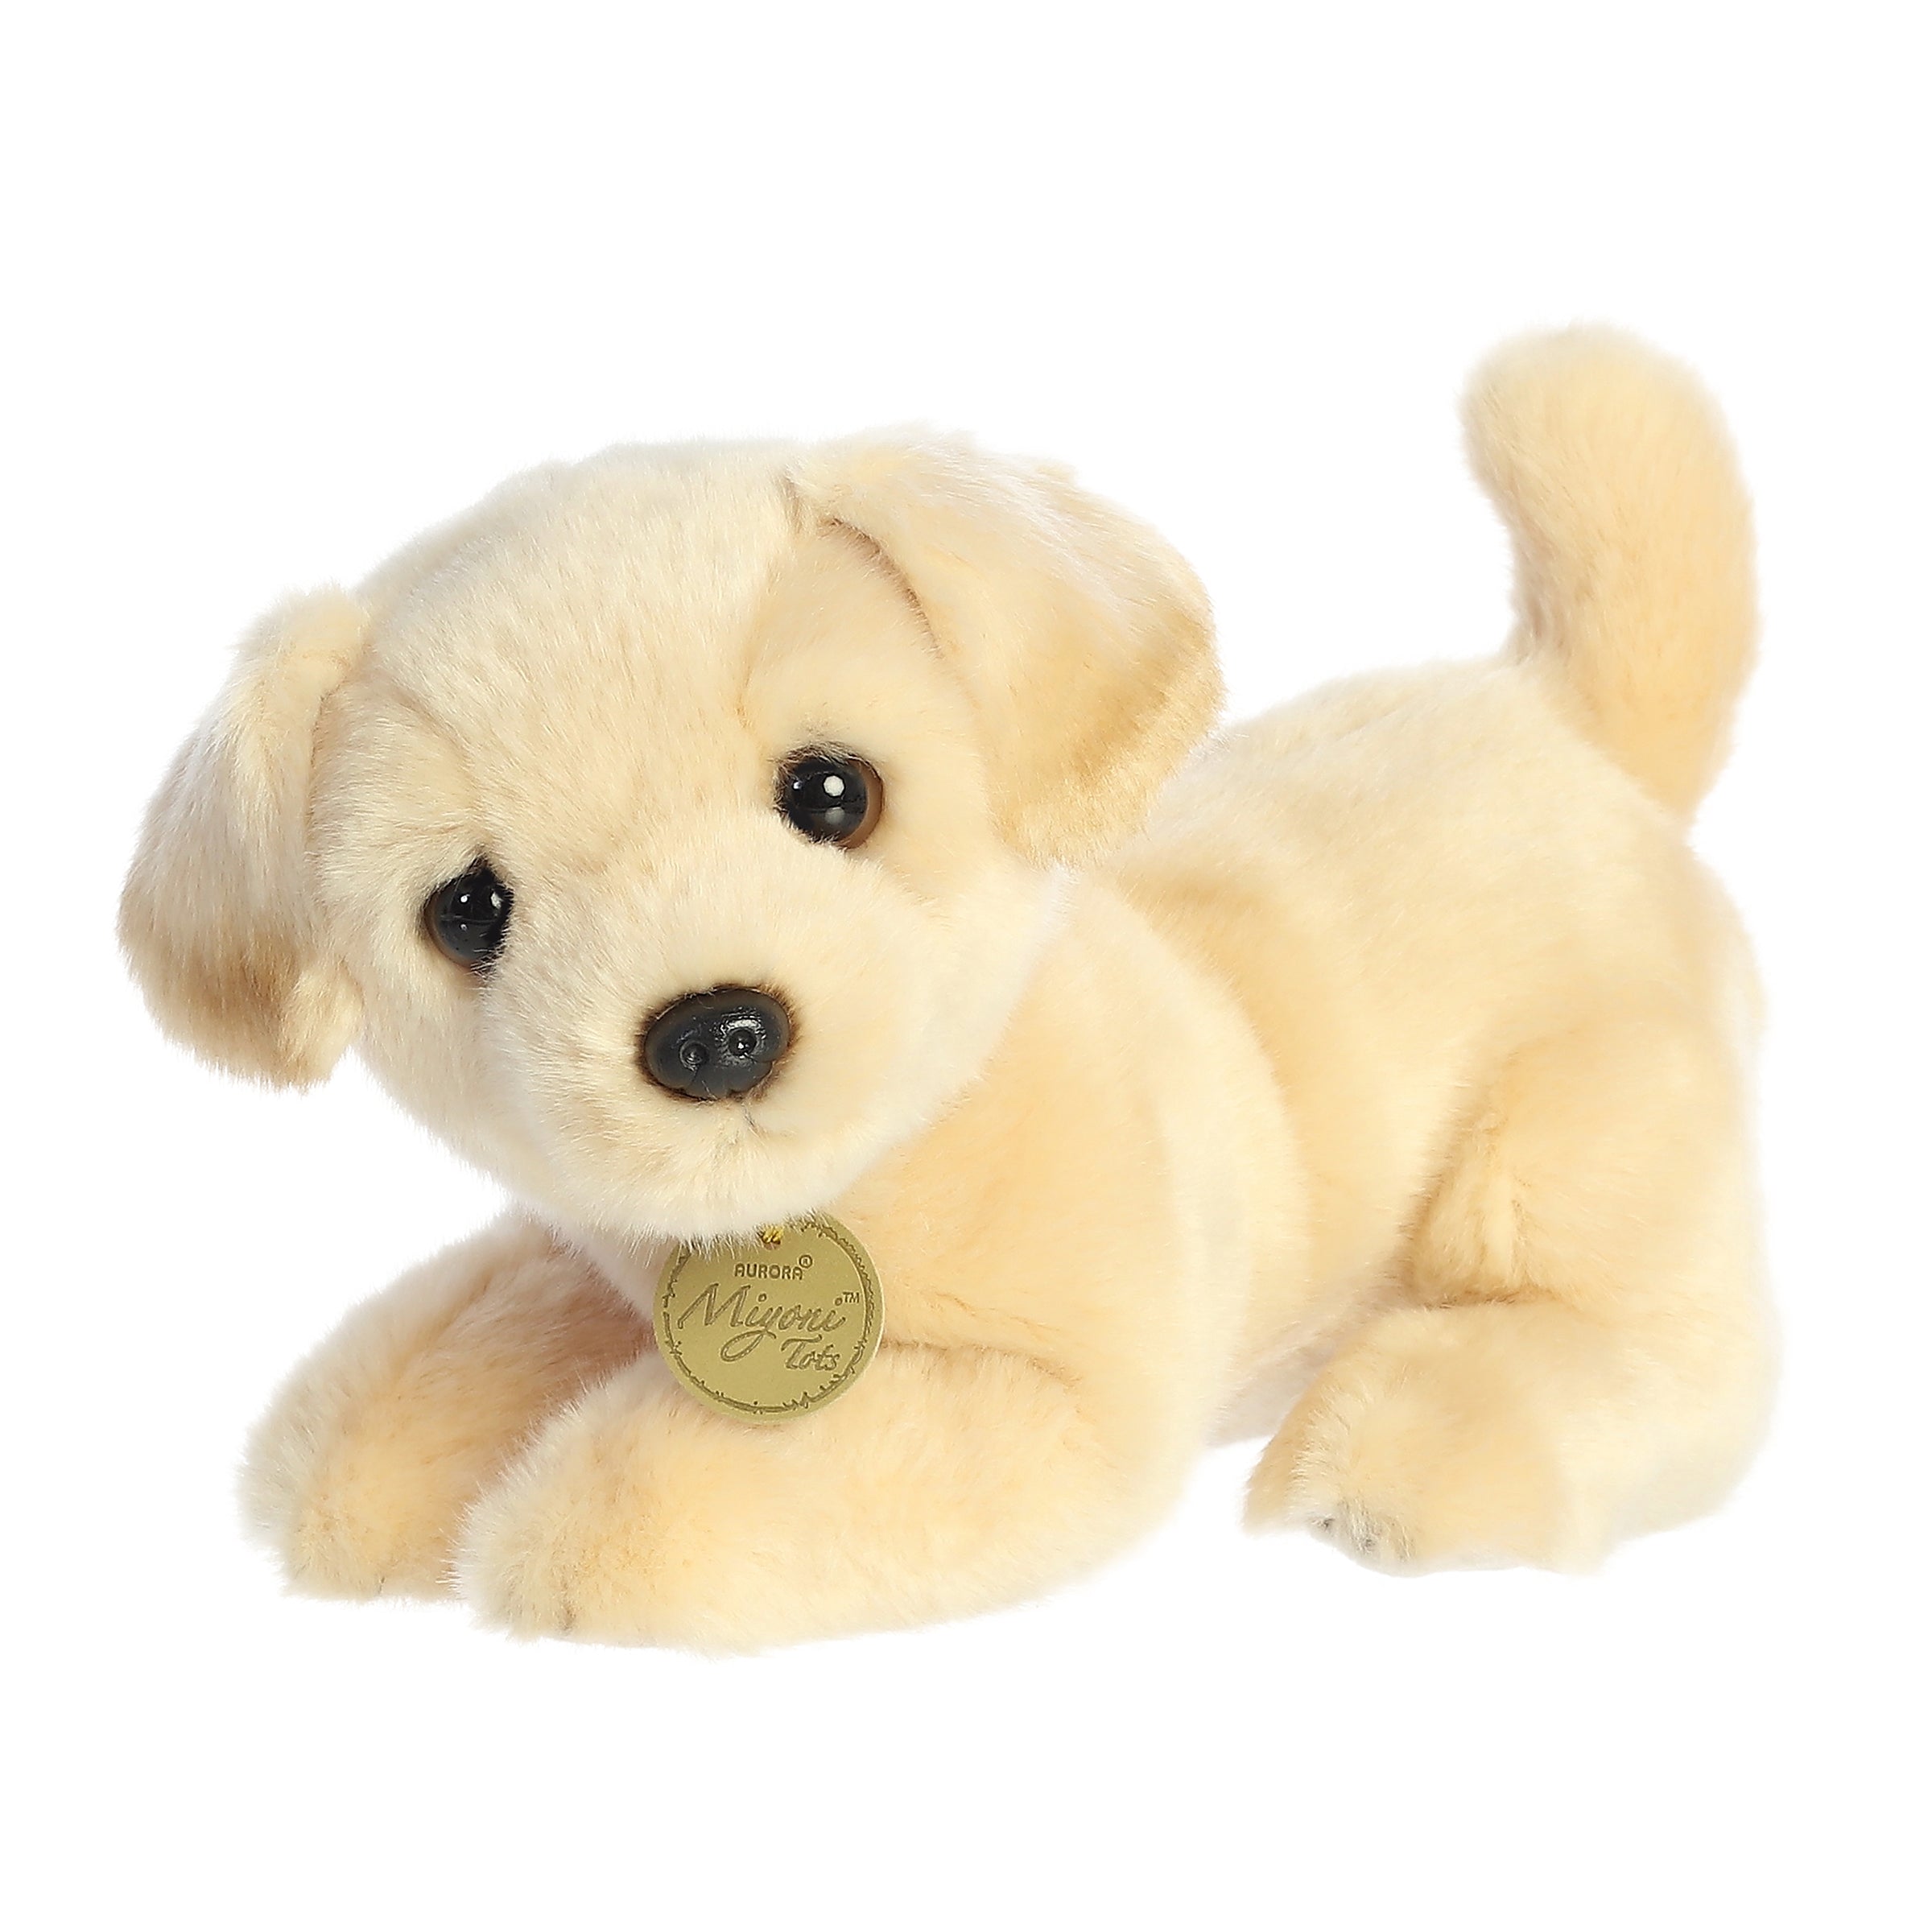 Golden-furred Yellow Lab Pup stuffed animal in a playful pose with tail high, floppy ears, cute plastic nose, and brown eyes.